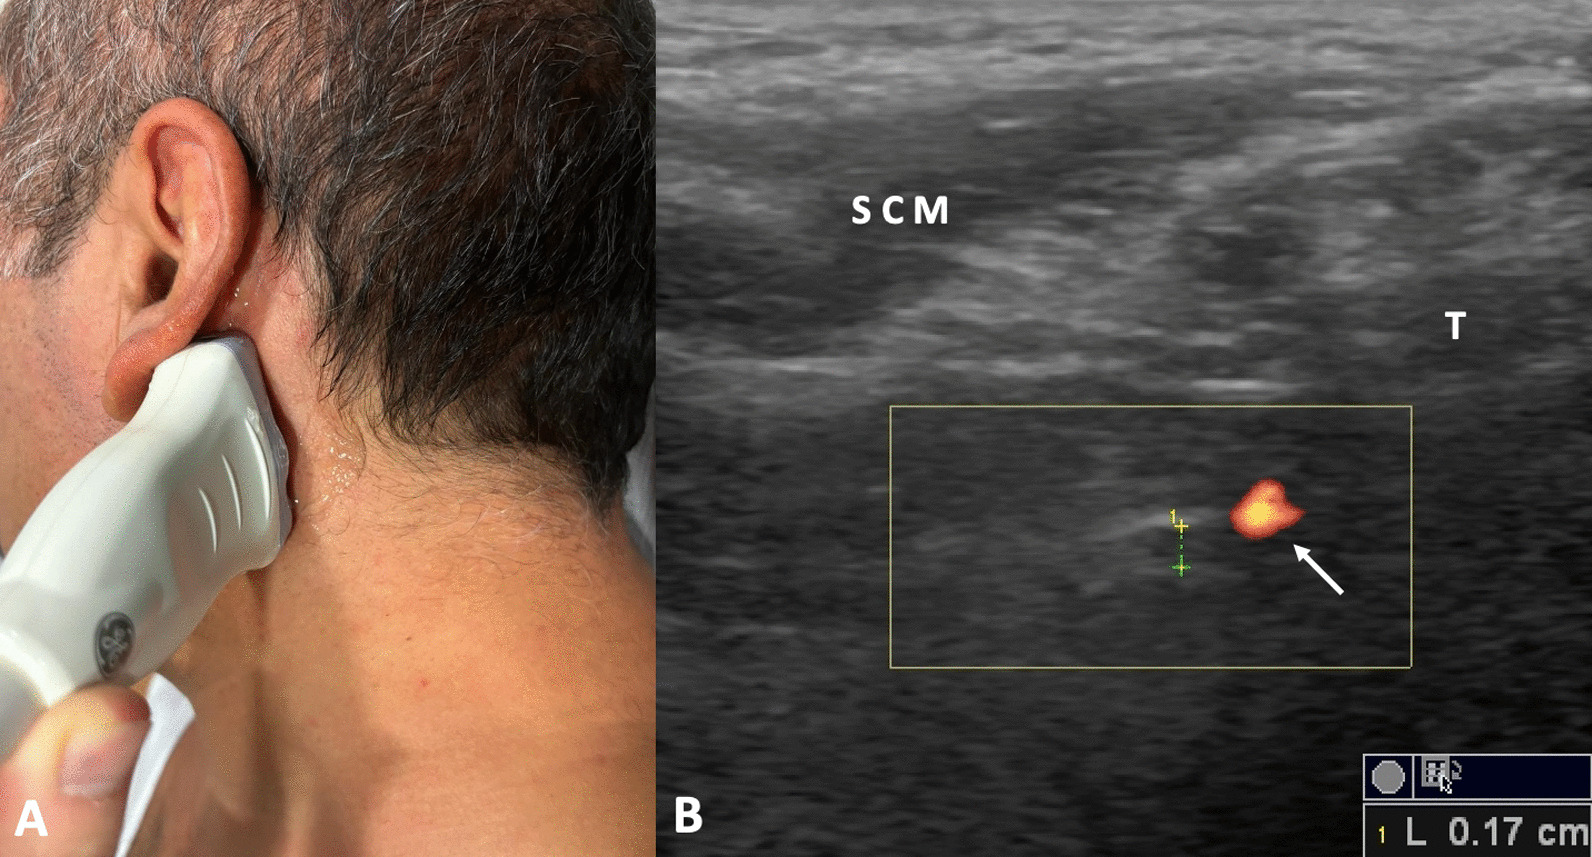 Ultrasonography in Bell’s Palsy: seeing the nerve rather than trialing on the muscles